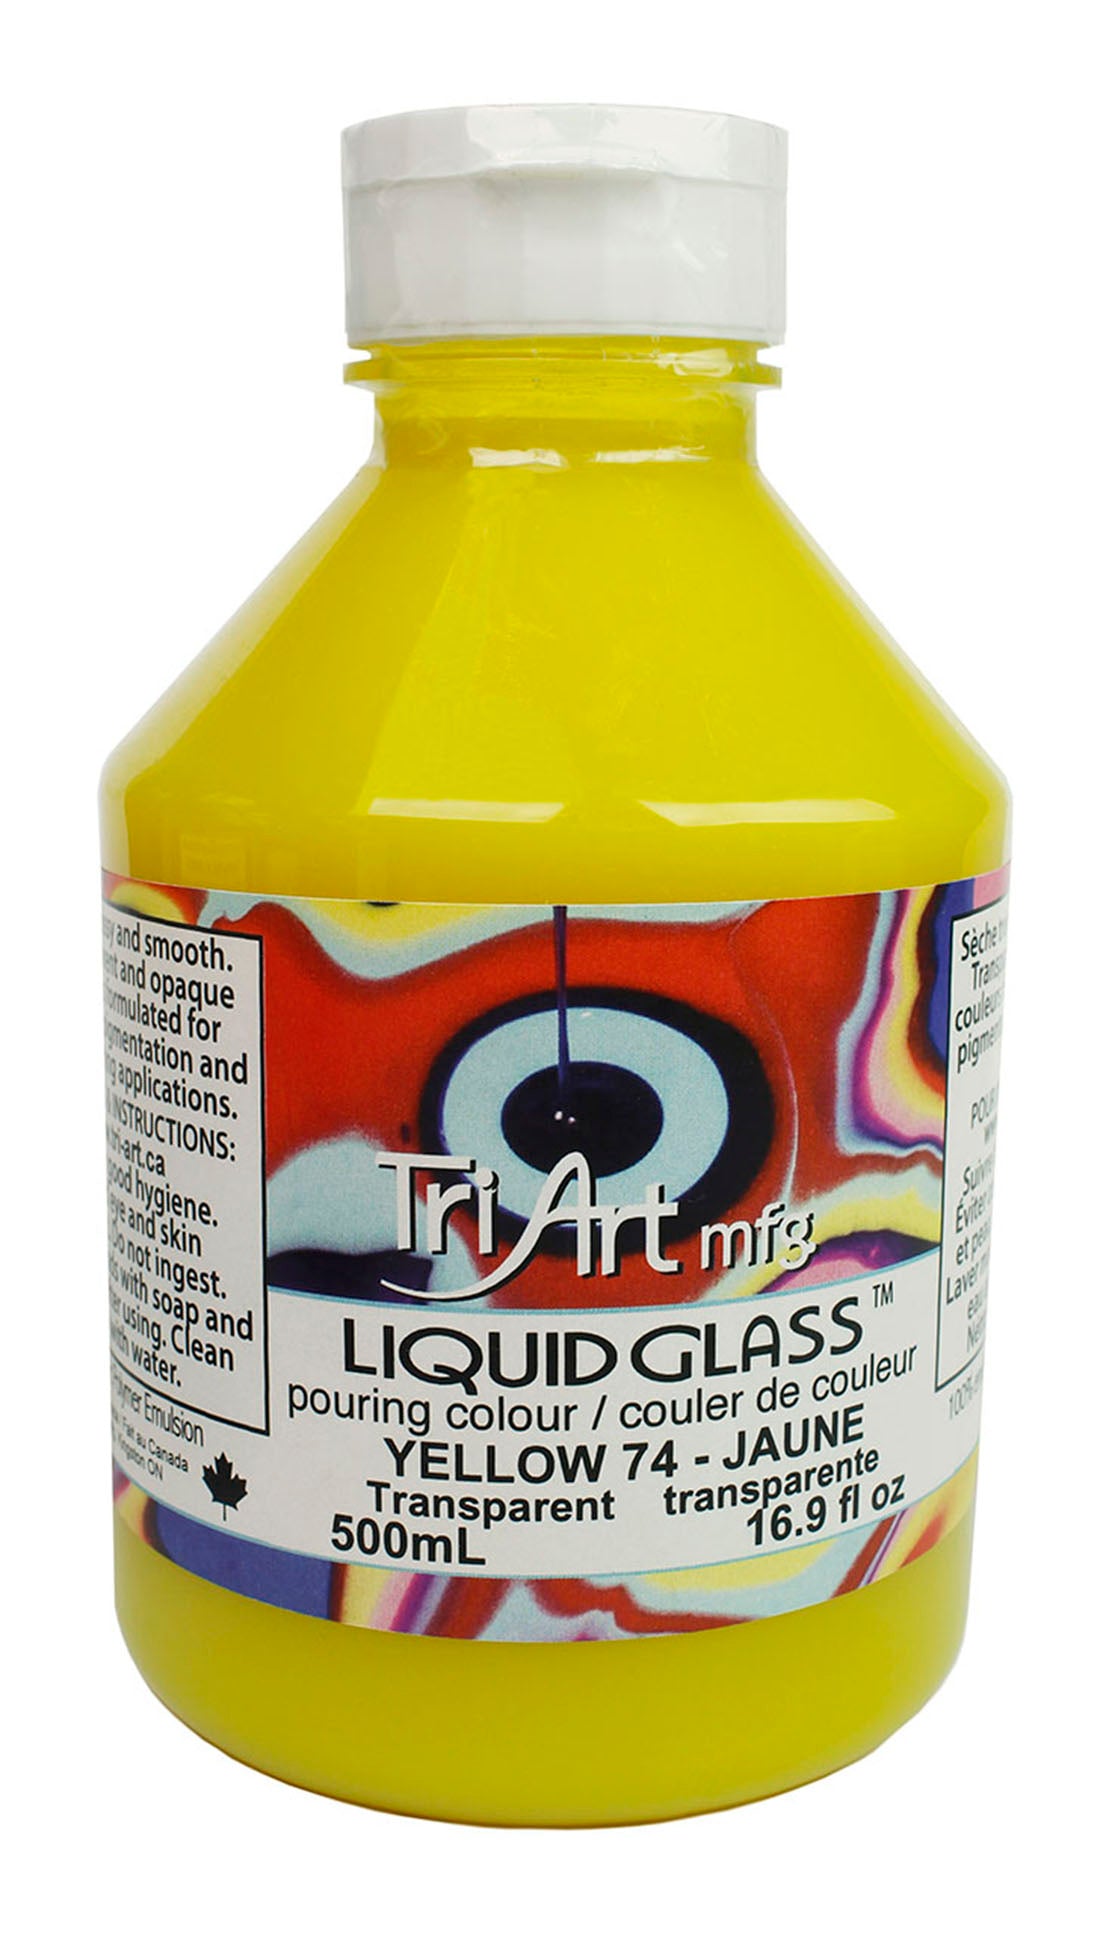 Liquid Glass - Pouring Colours - Yellow (4664901206103)